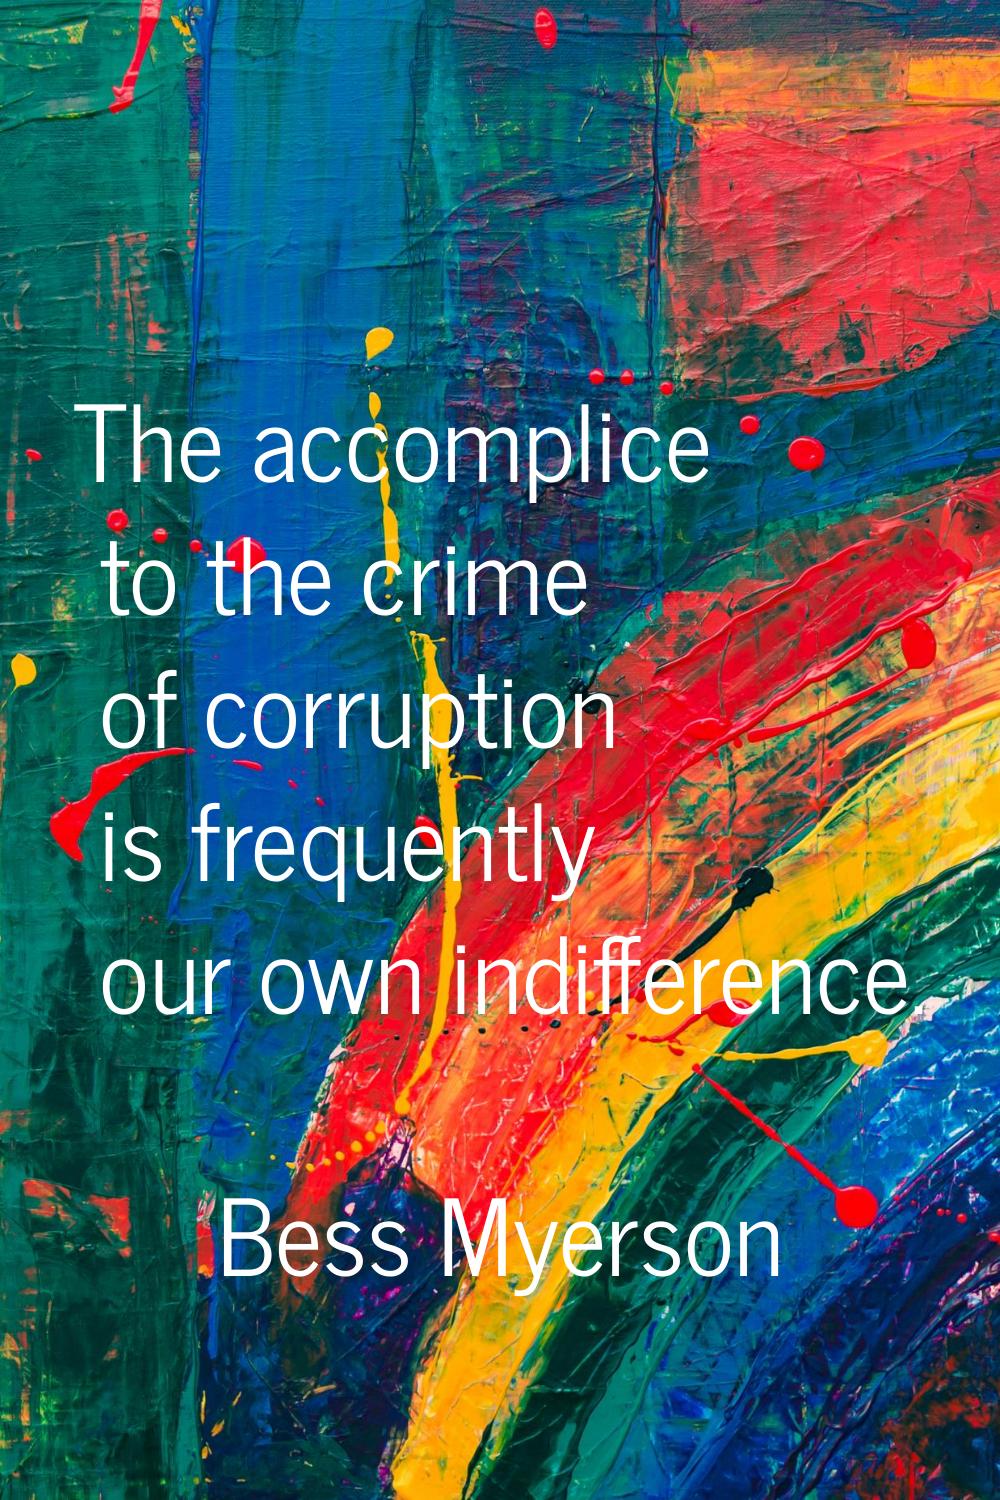 The accomplice to the crime of corruption is frequently our own indifference.